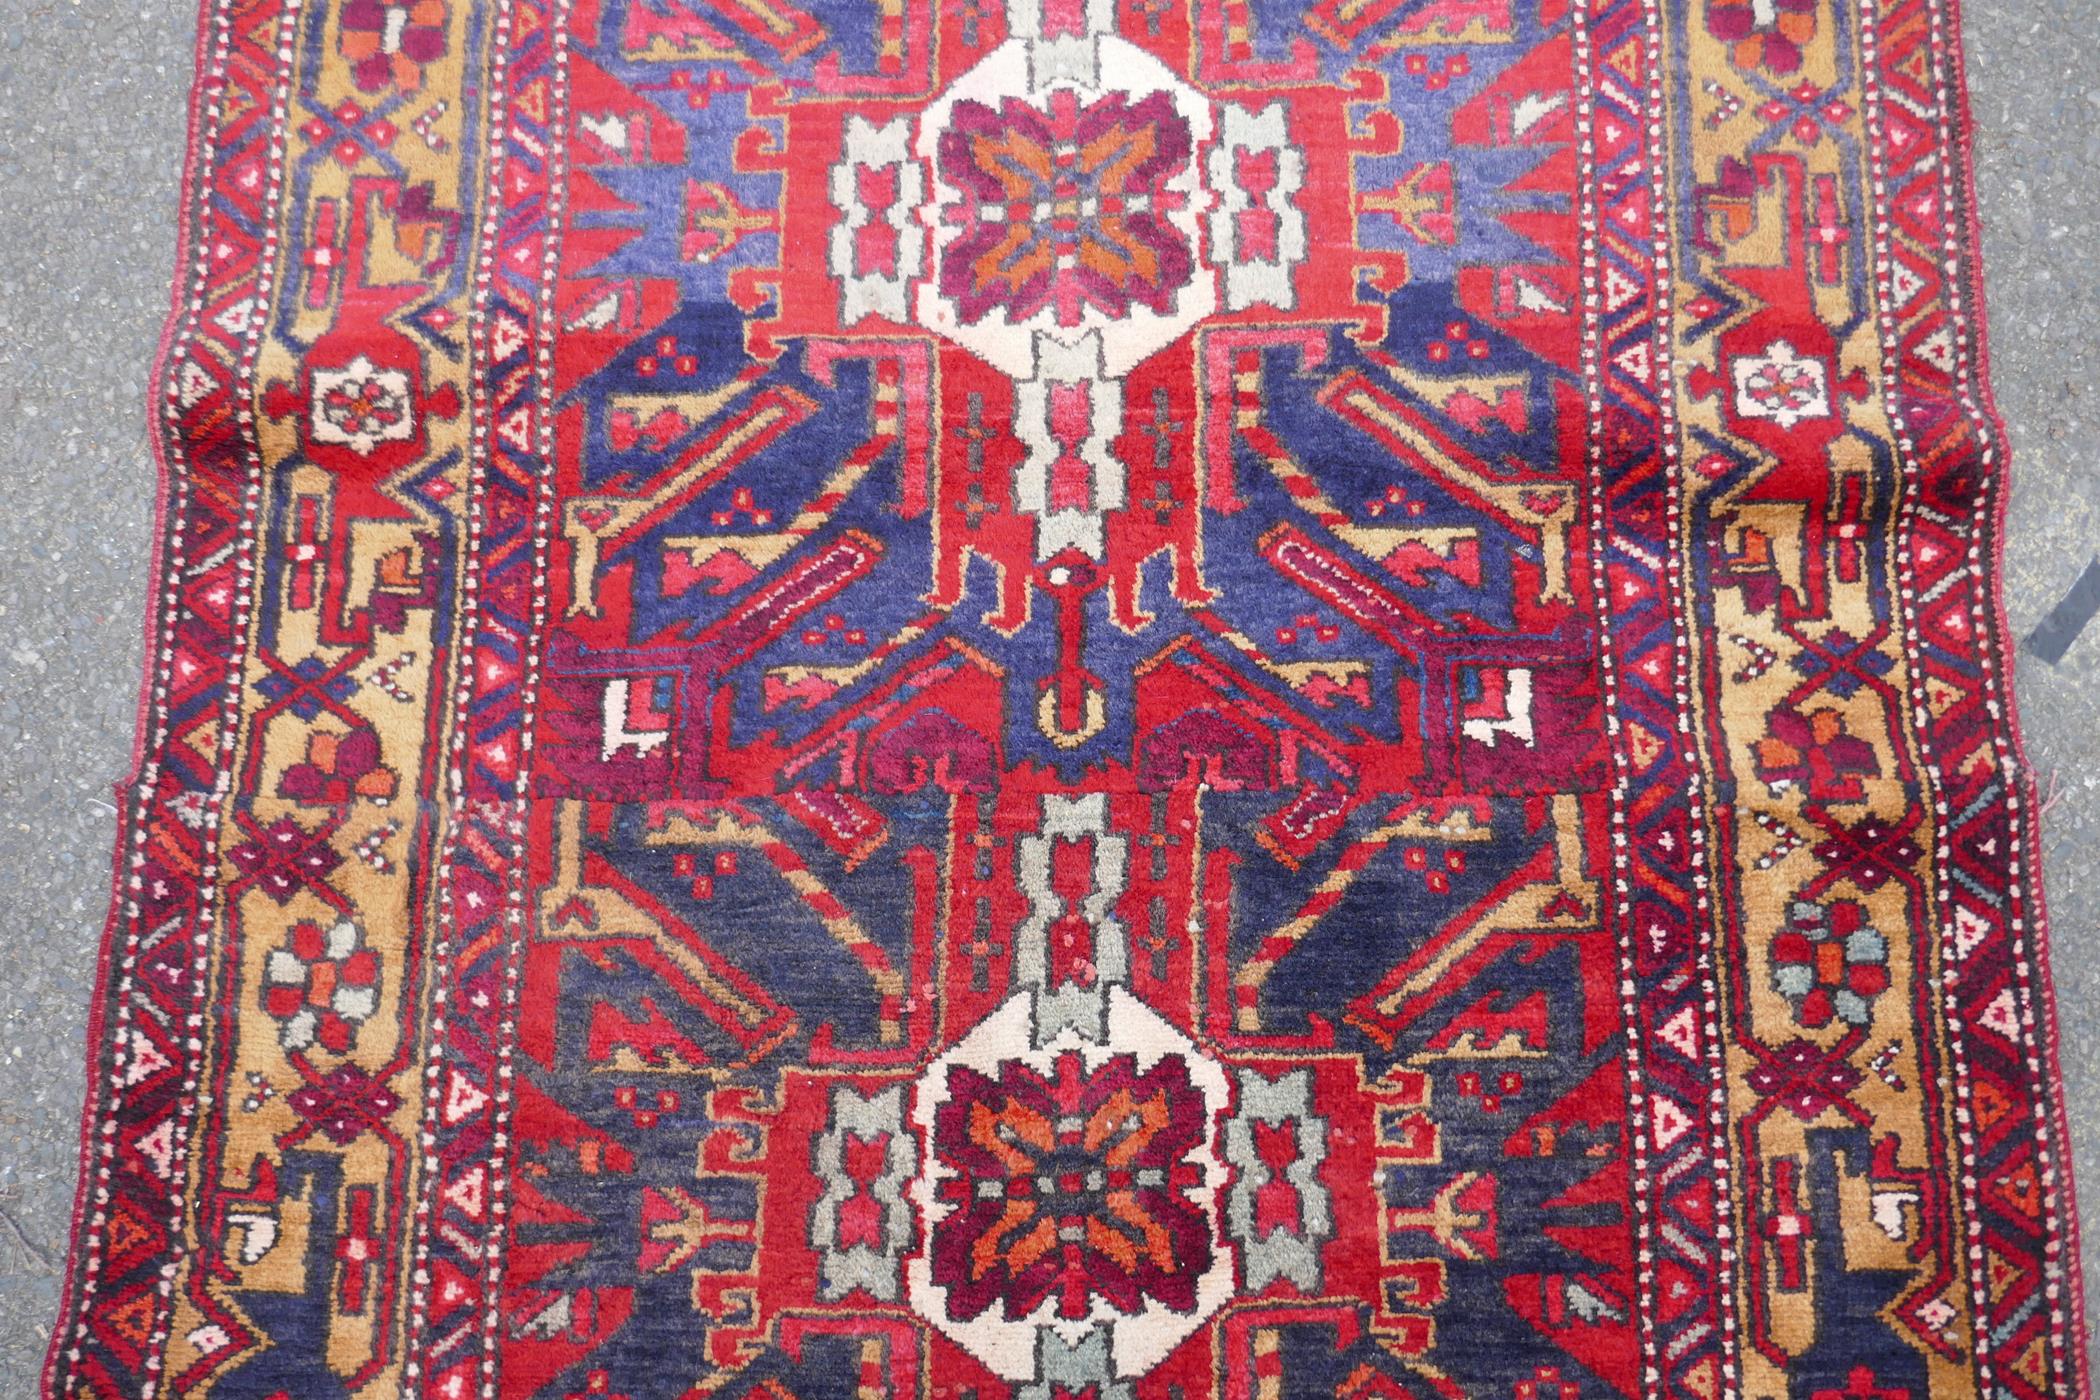 A Persian red ground Heritz runner with a starburst medallion design, 46" x 131" - Image 5 of 8